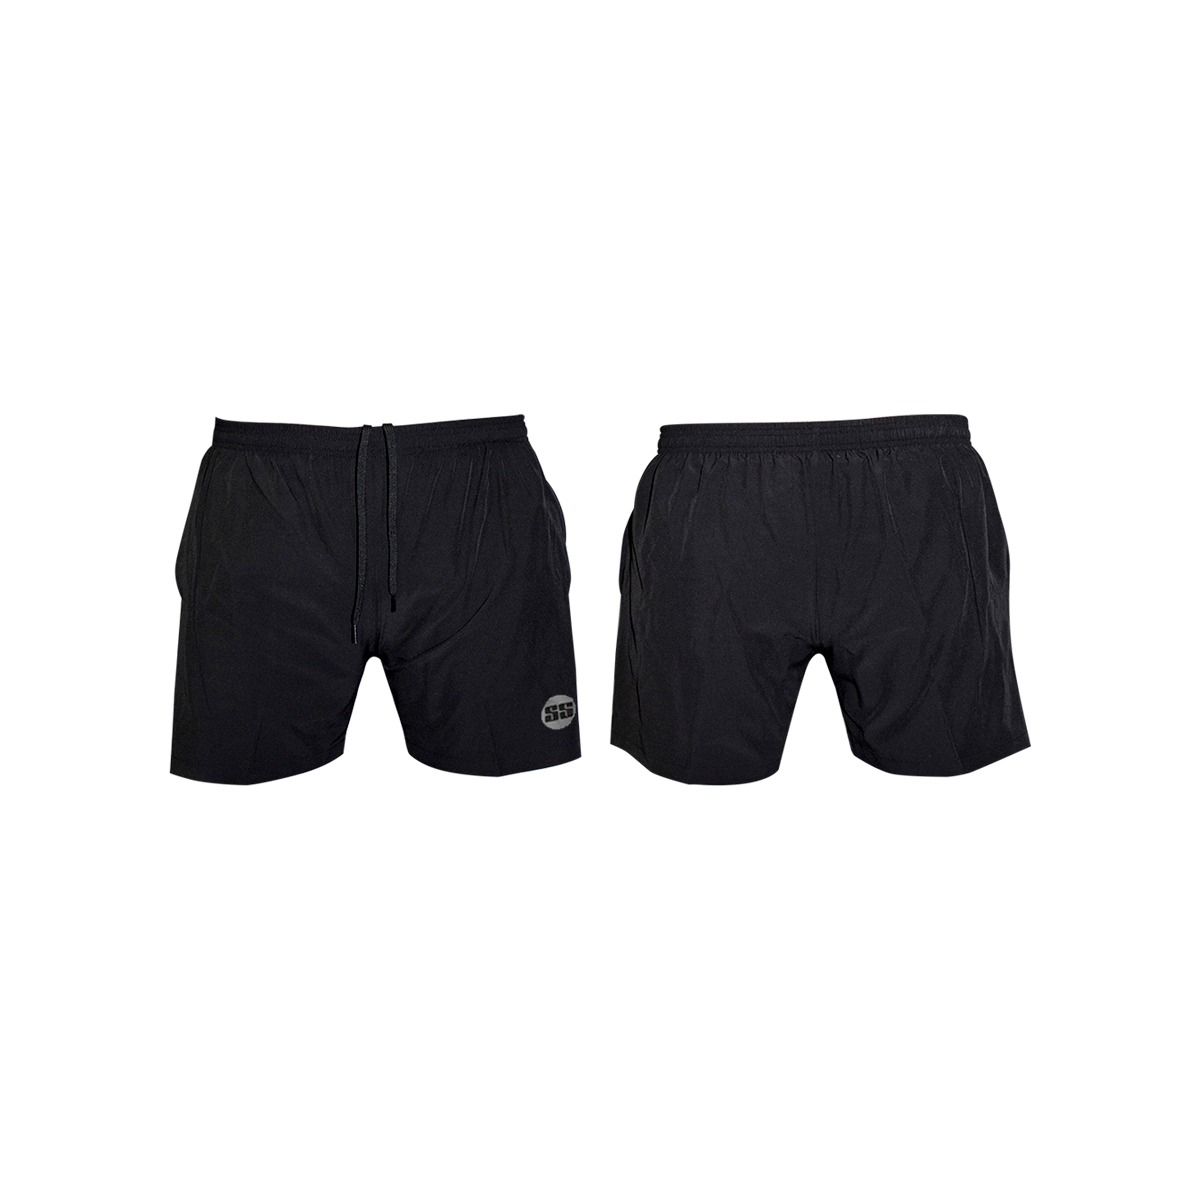 Buy SS MASTER - SHORTS Online at Best Price | SS Cricket